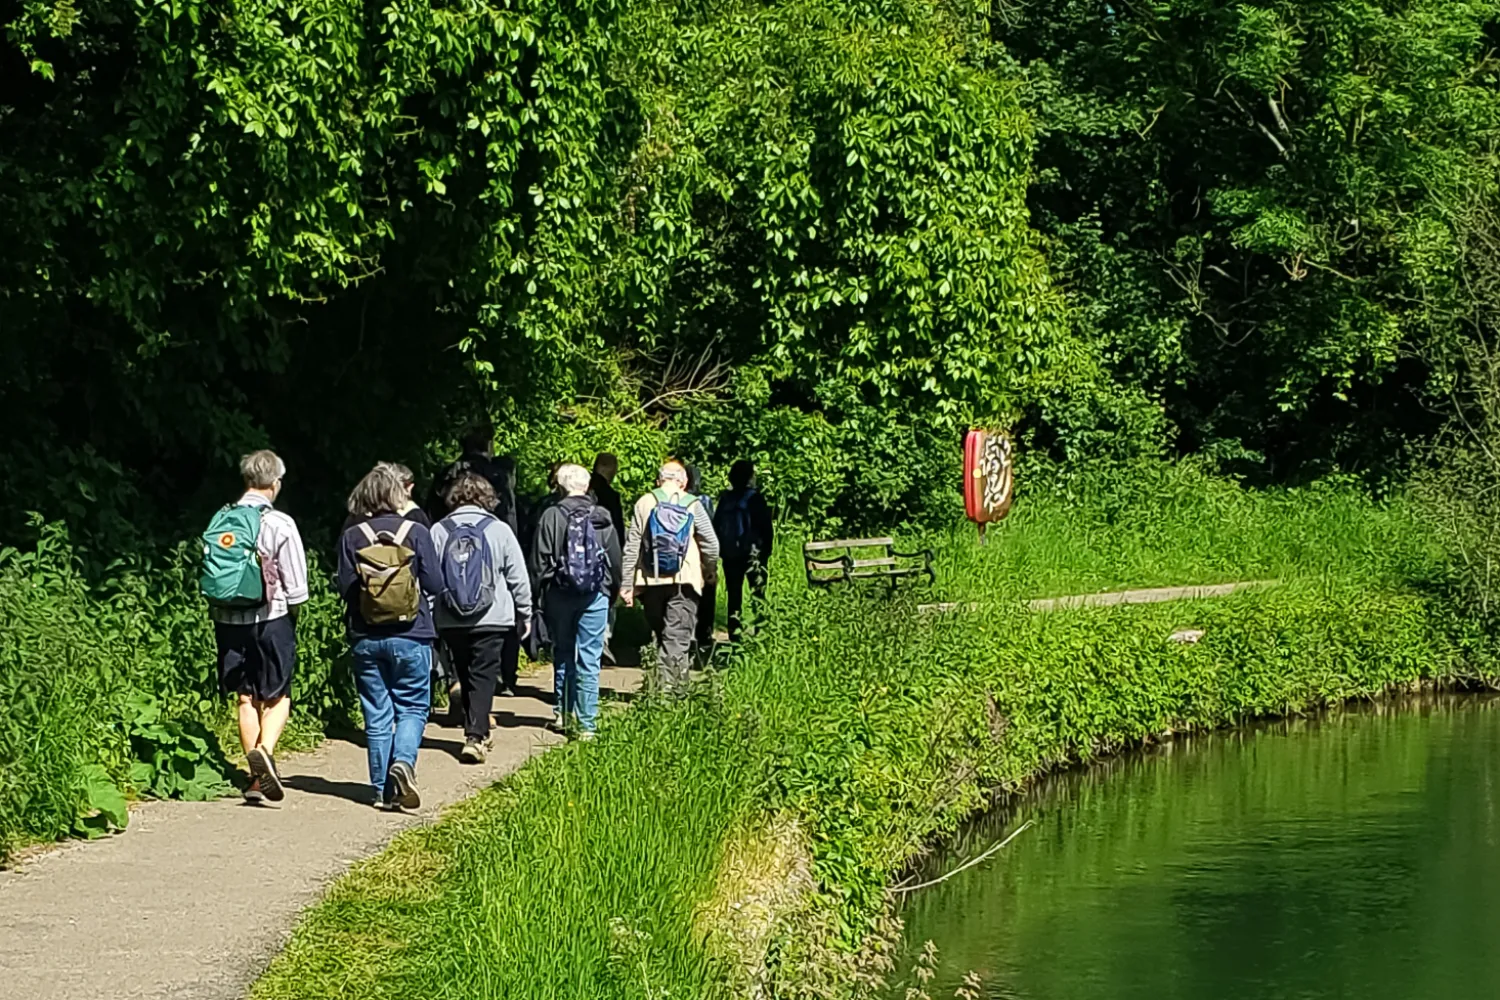 A small group of pilgrims walk past a bend in the river Thames